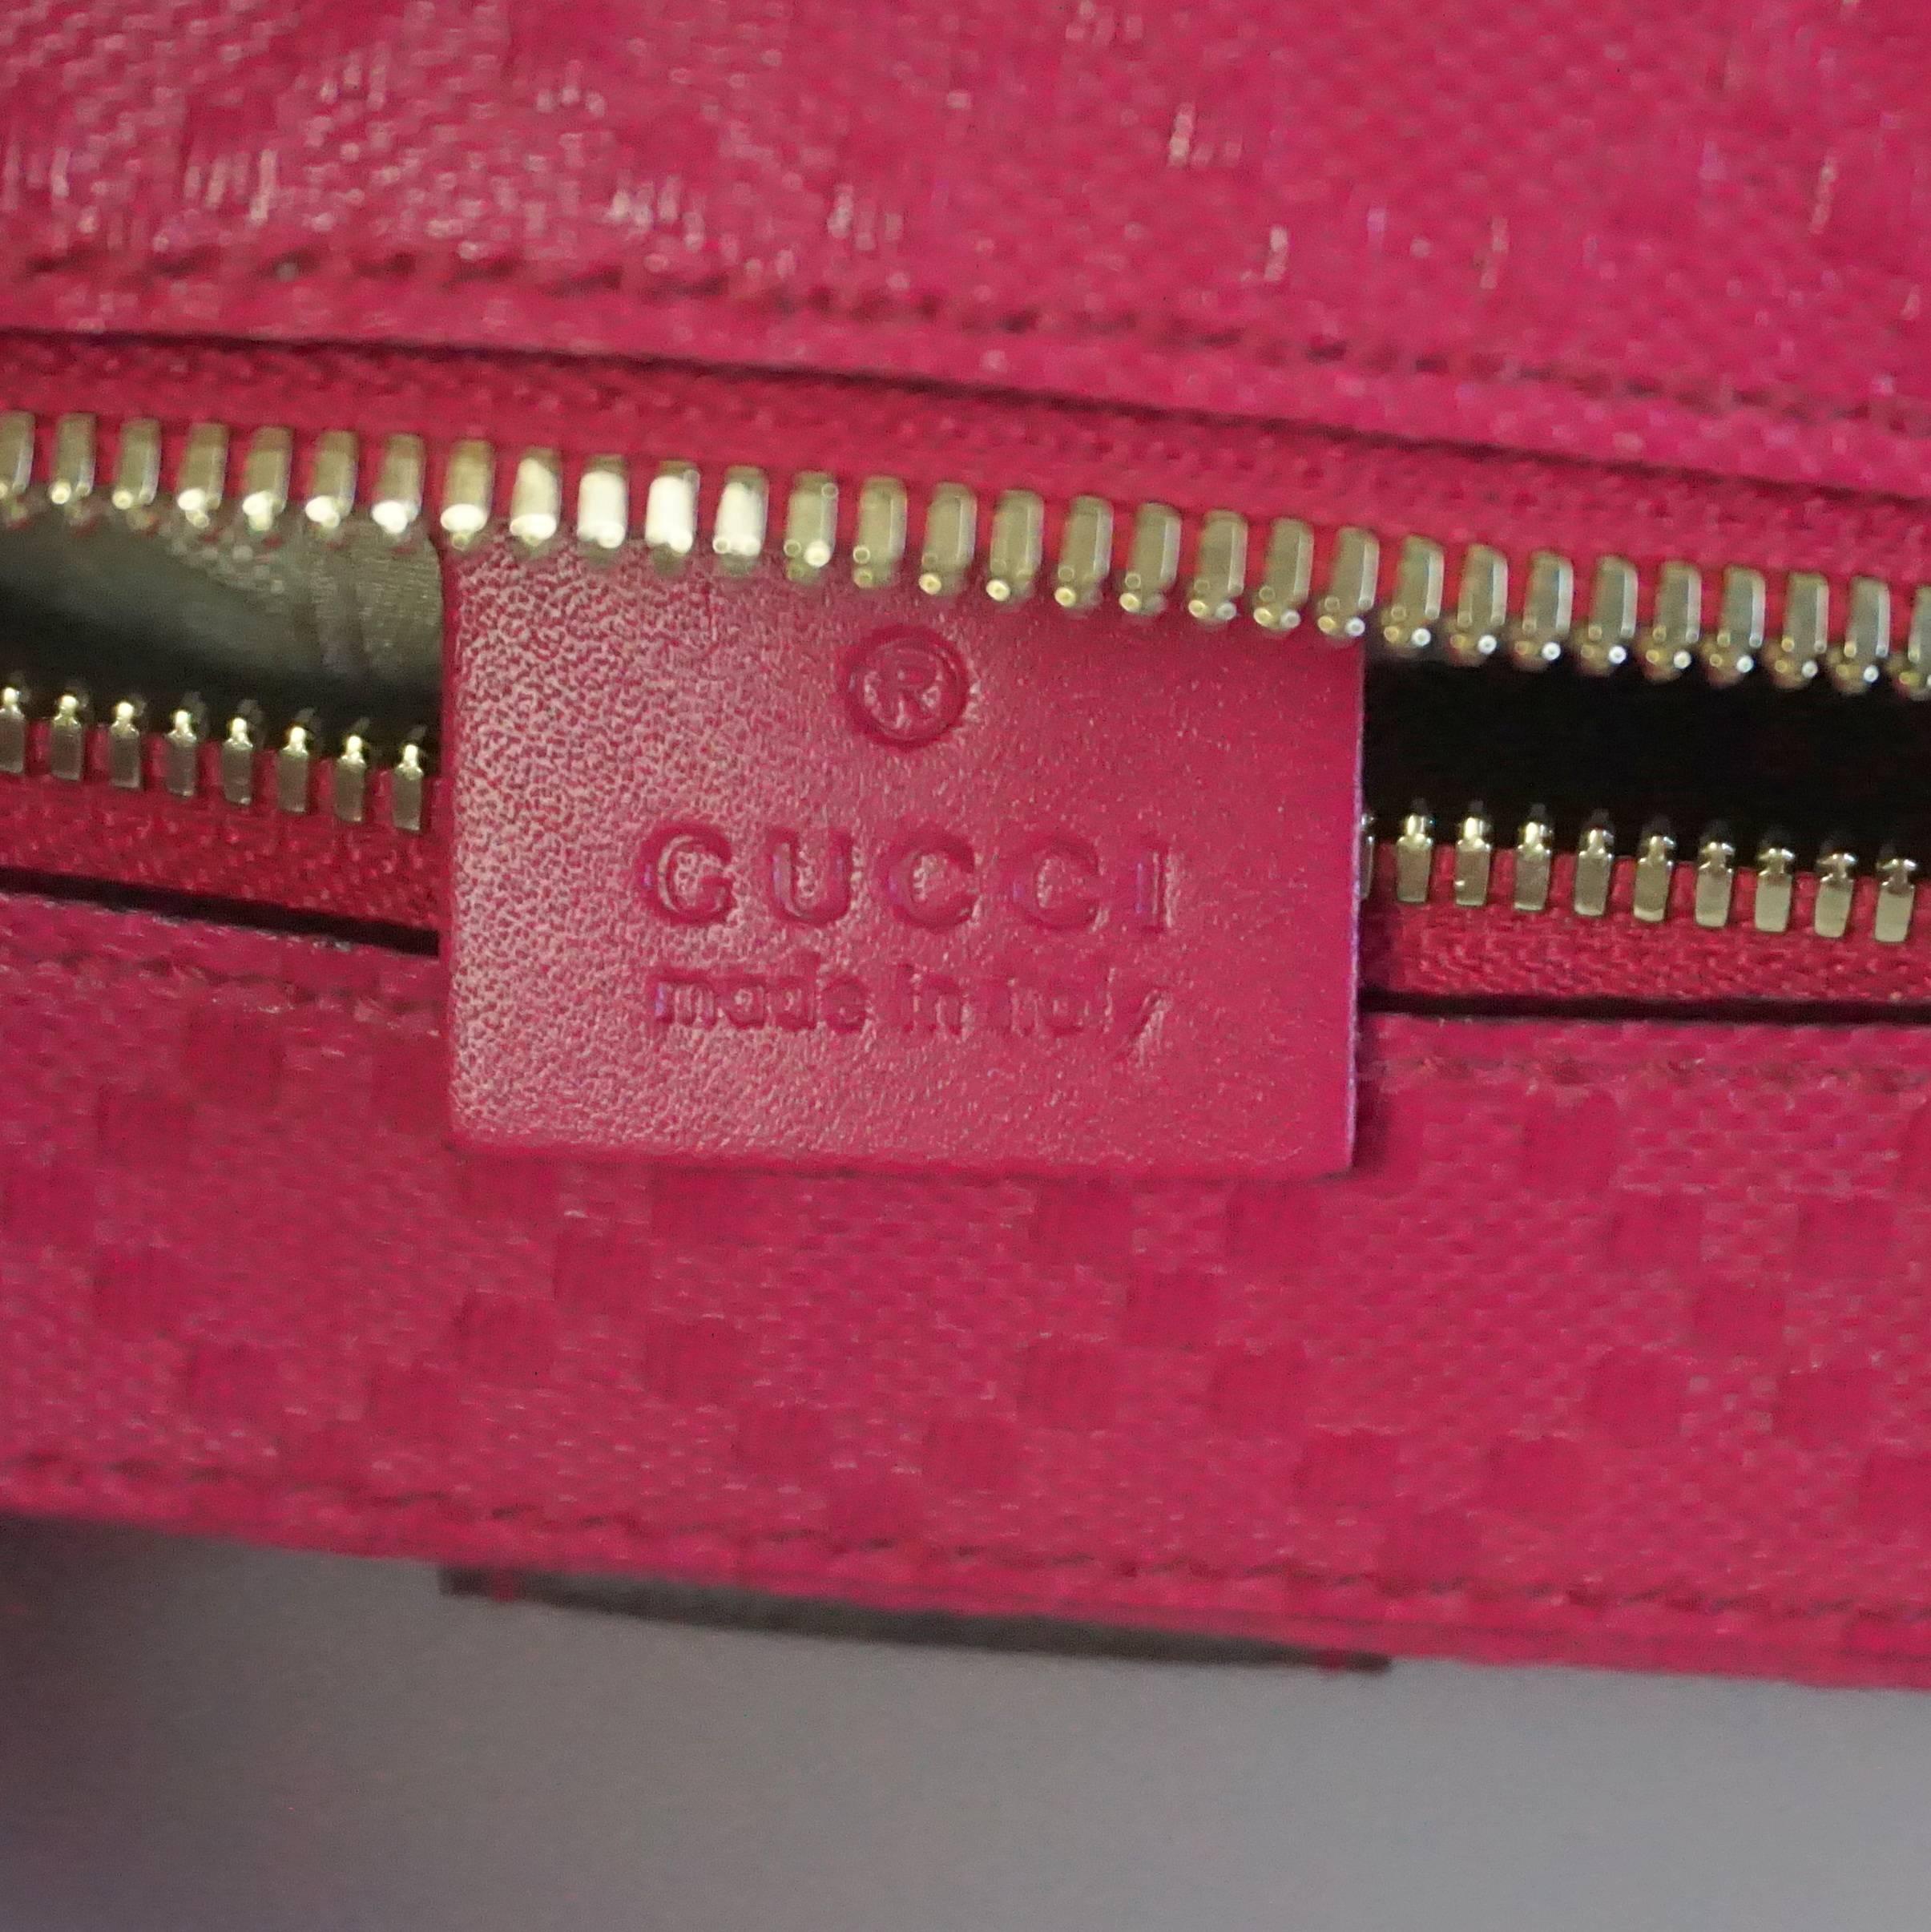 New Gucci Pink Diamante Top Handle Bag with Strap - 2015 1